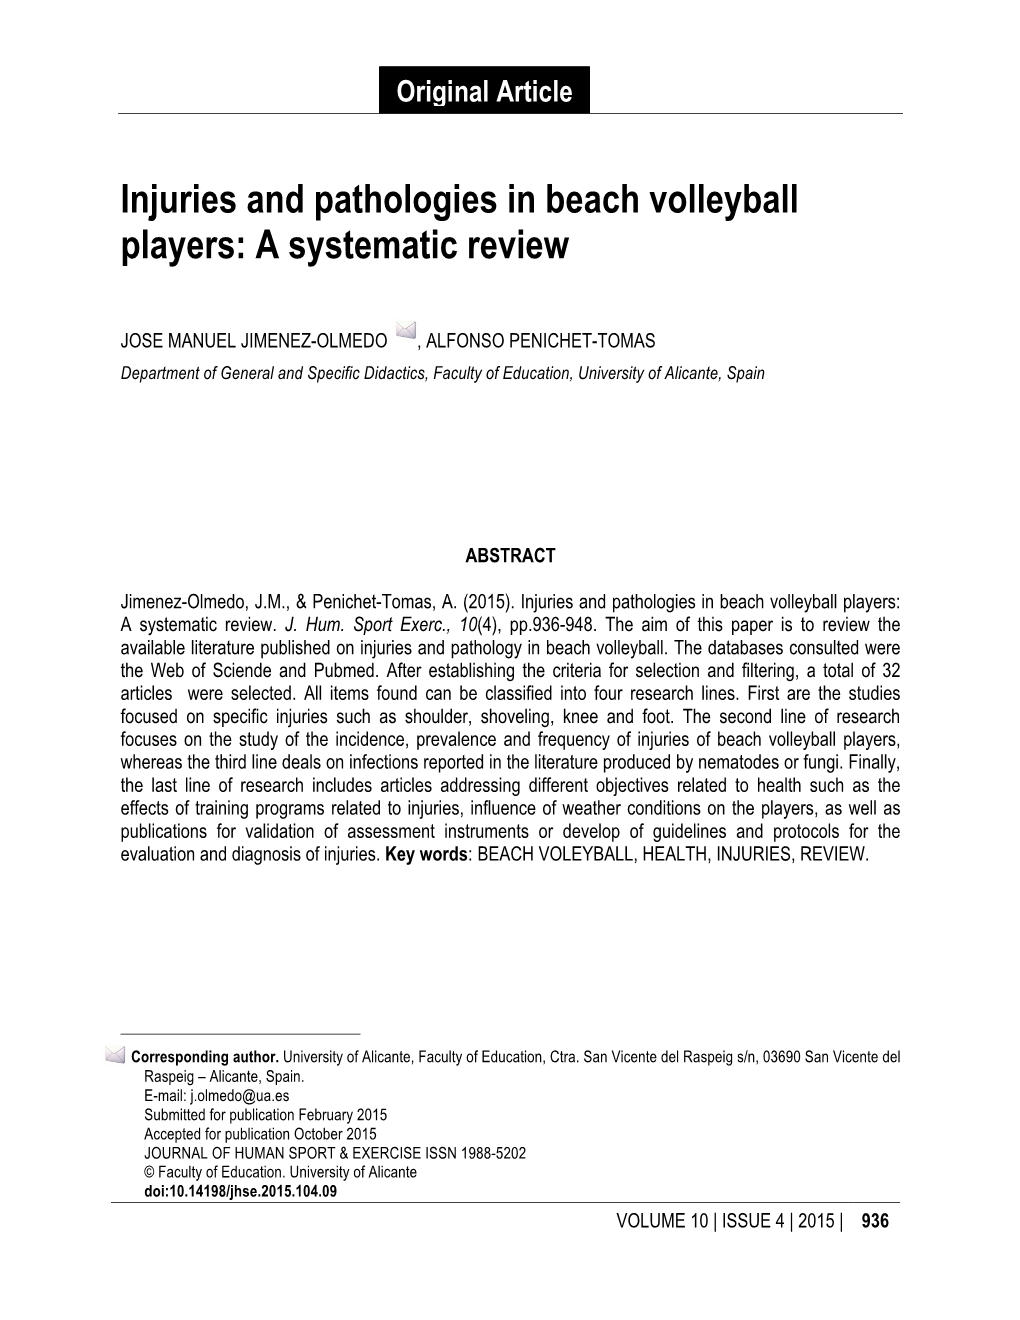 Injuries and Pathologies in Beach Volleyball Players: a Systematic Review